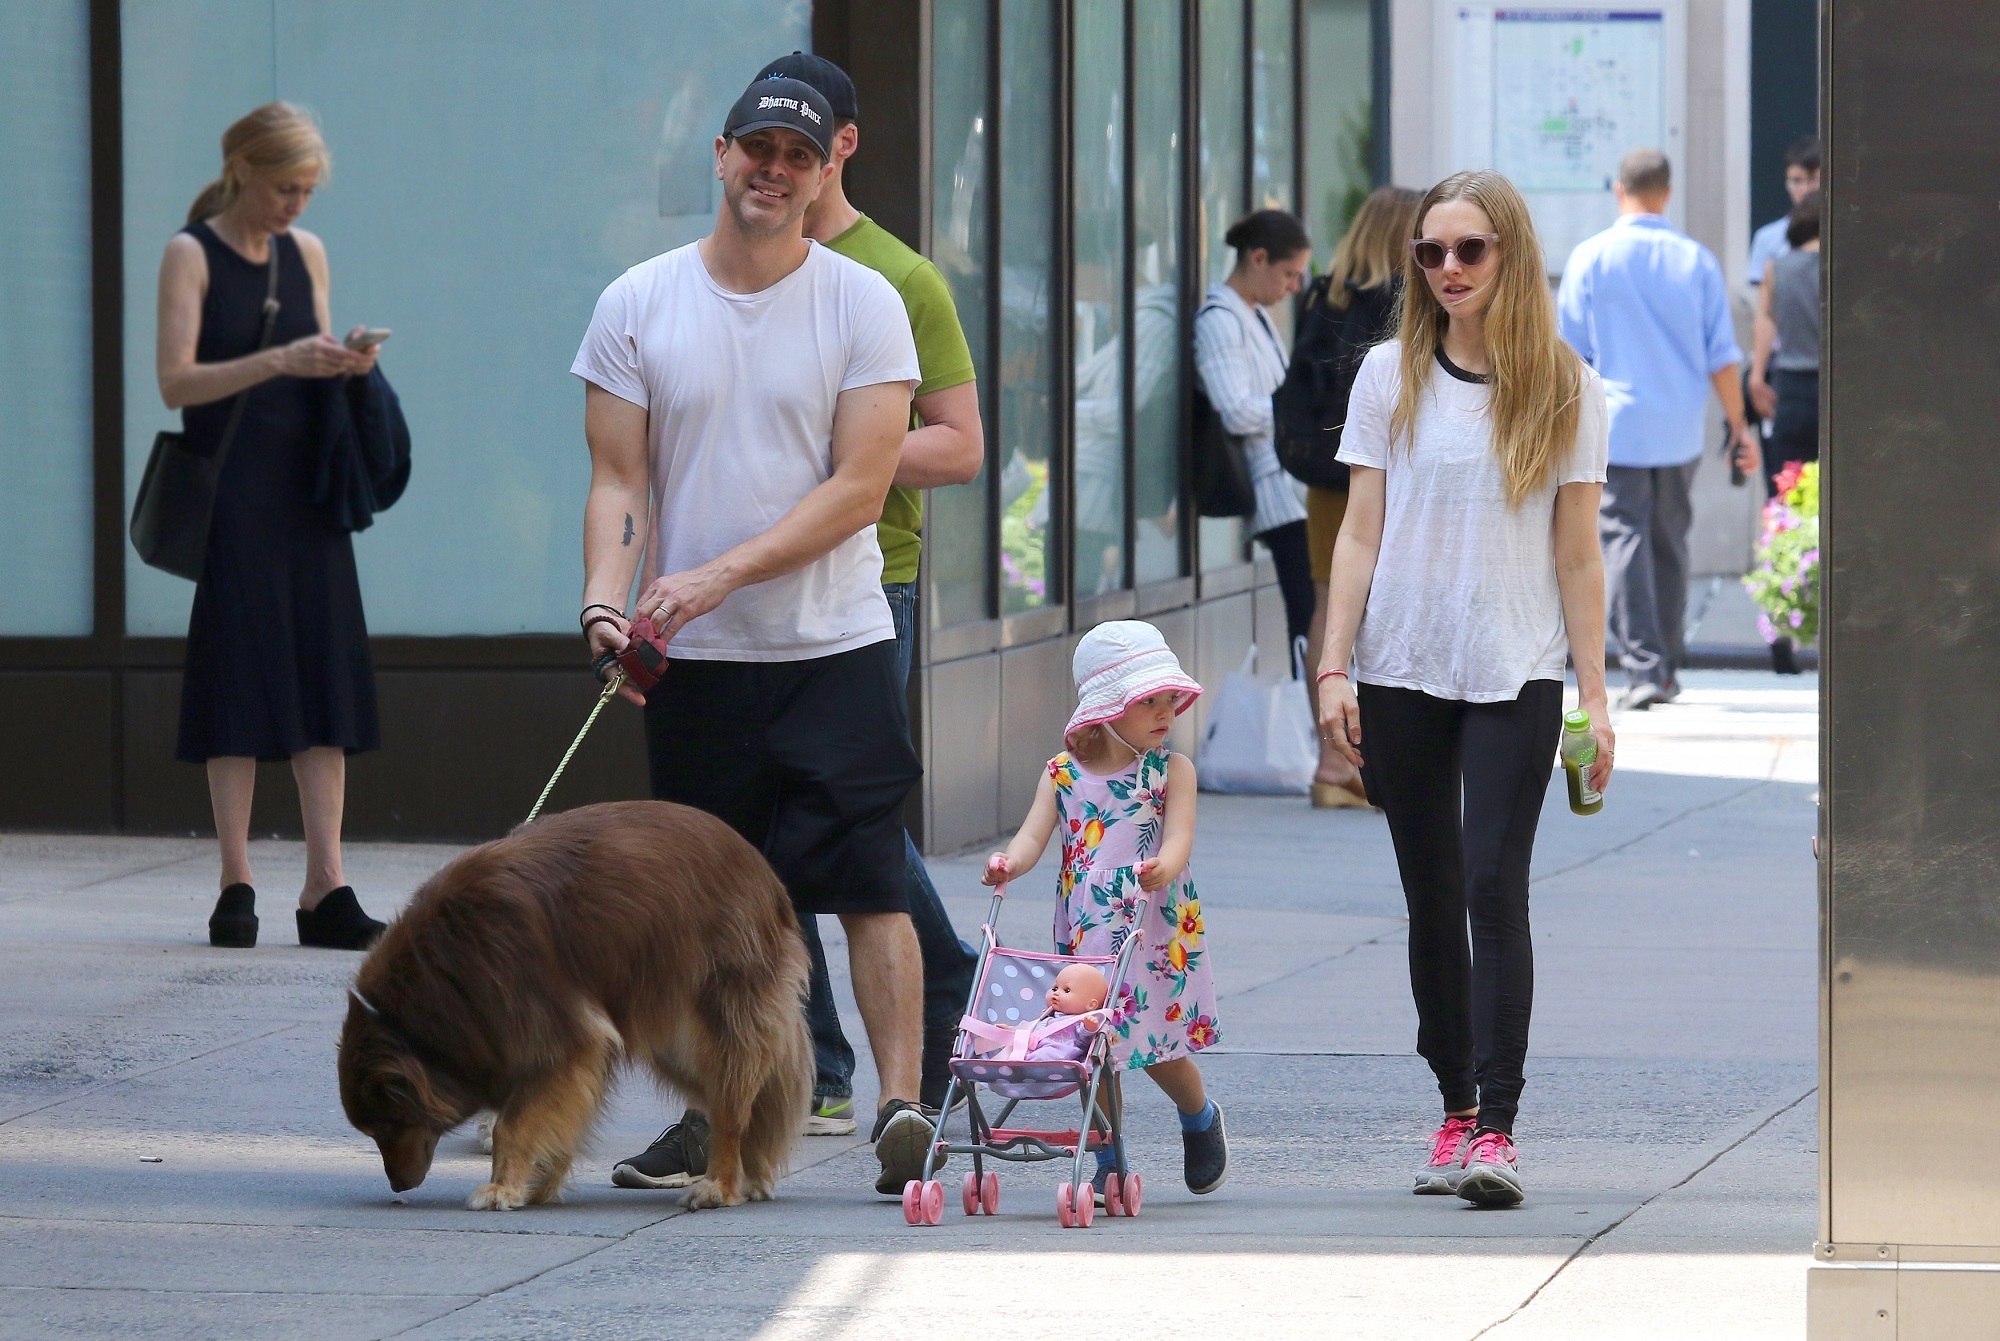 New York, NY  - Amanda Seyfried and husband Thomas Sadoski go for a stroll with their daughter Nina and dog in Downtown Manhattan.

BACKGRID USA 8 AUGUST 2019,Image: 463375614, License: Rights-managed, Restrictions: , Model Release: no, Credit line: BrosNYC / BACKGRID / Backgrid USA / Profimedia